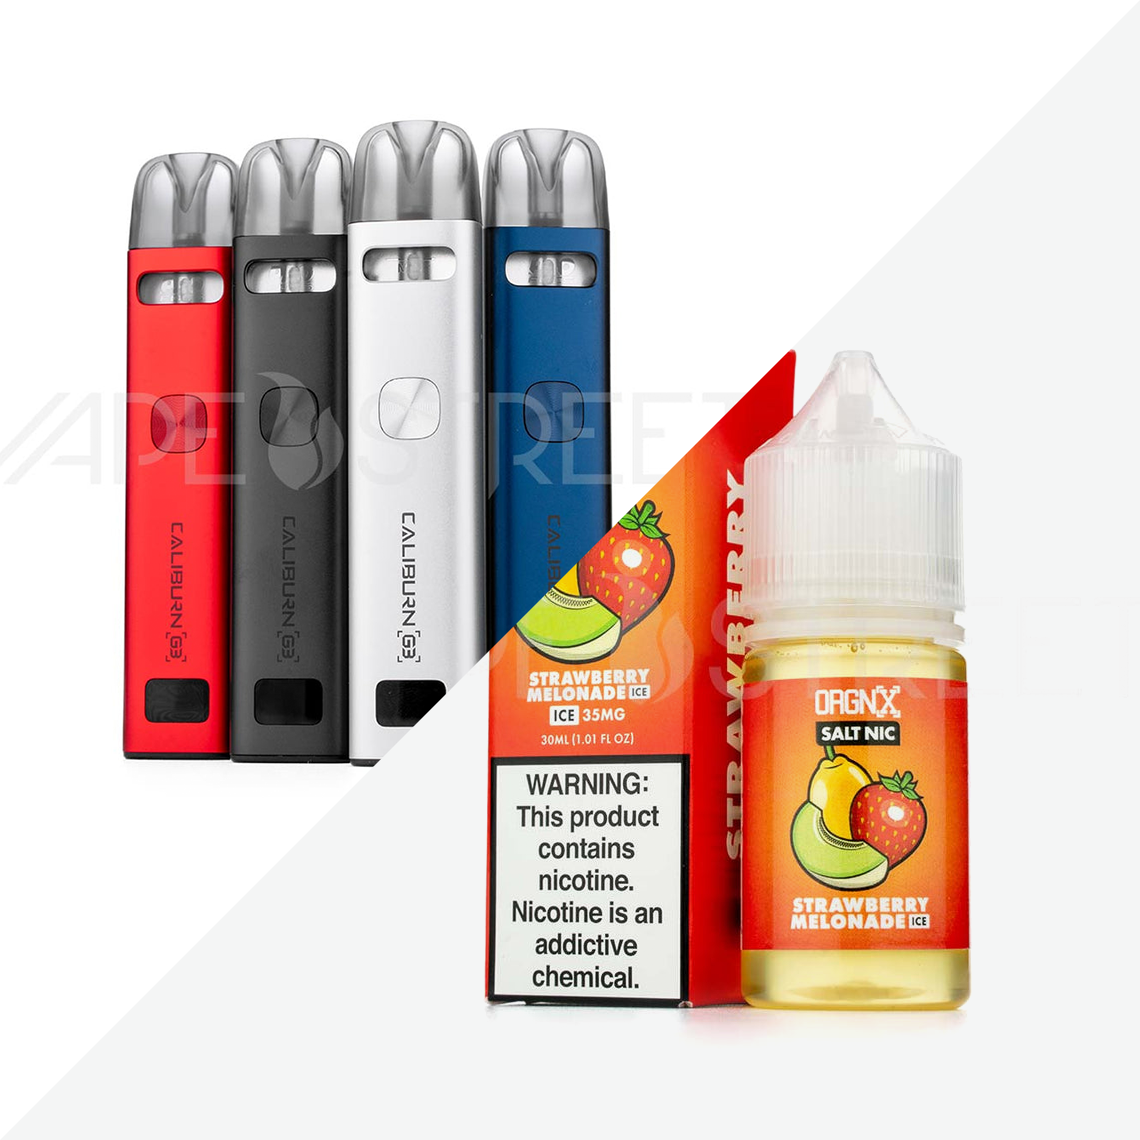 Vape Devices For Sale: Pod Systems, Box Mods, and Kits